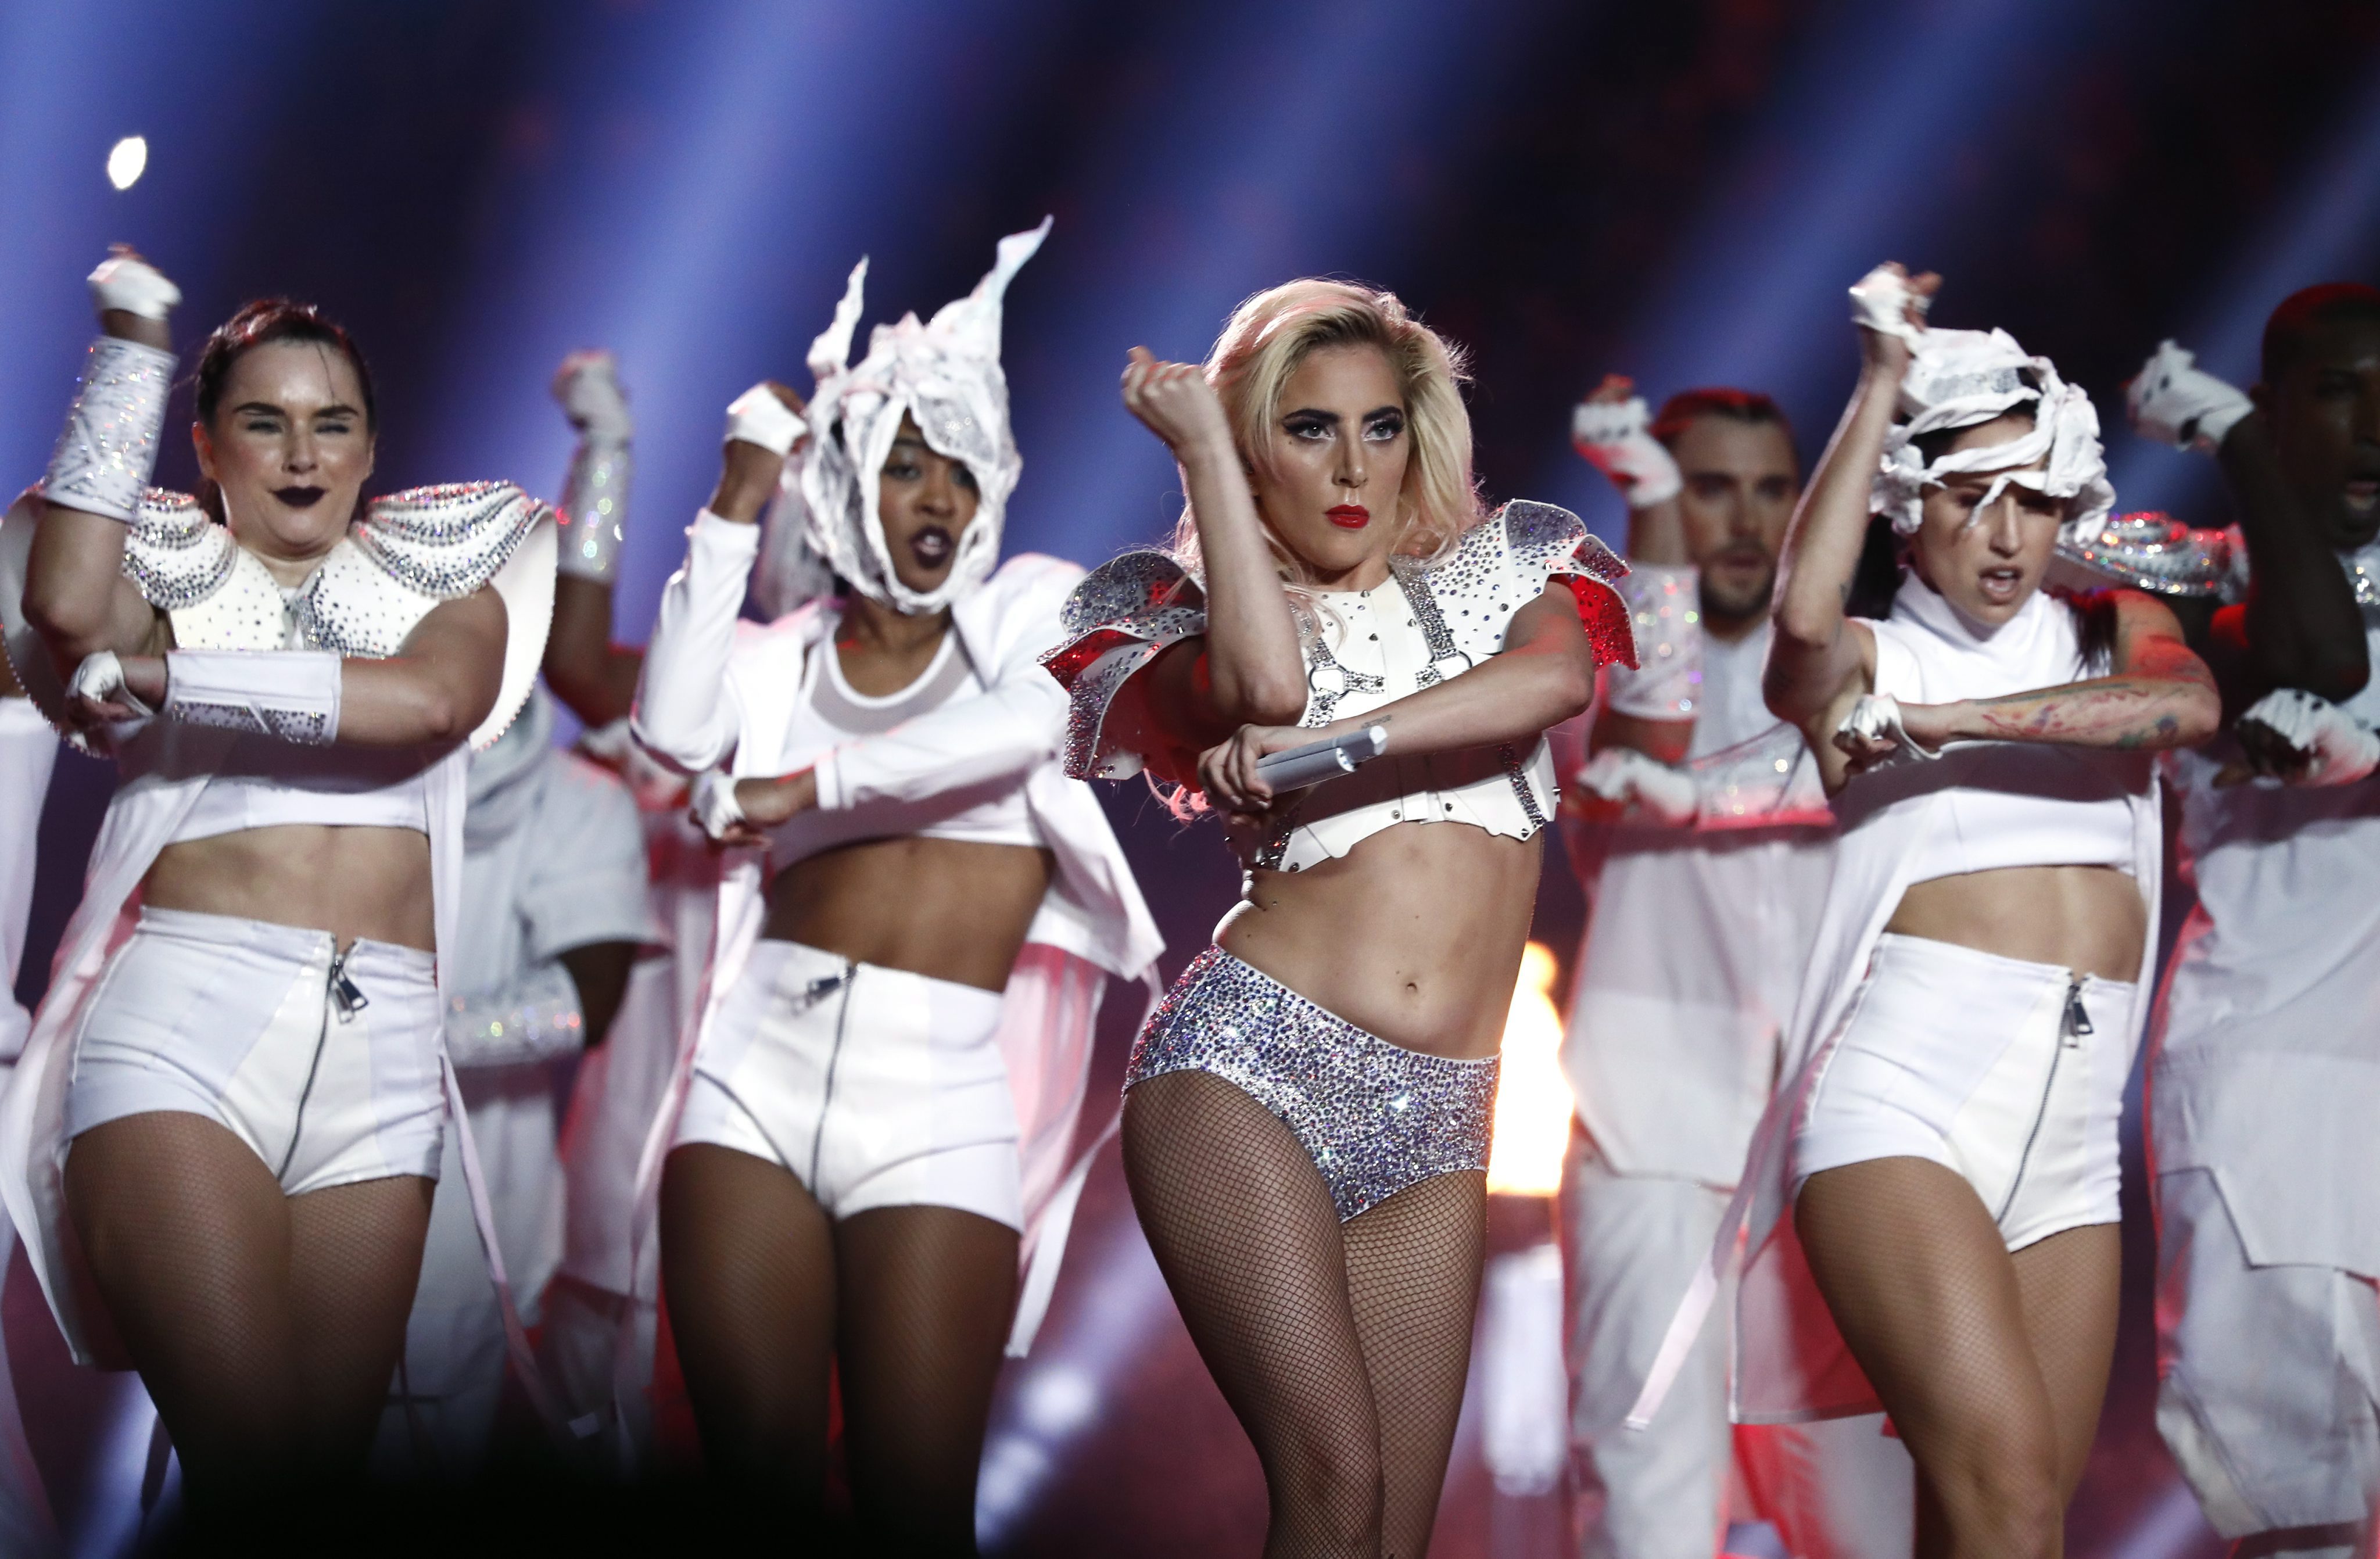 2017-02-05 19:24:39 epaselect epa05774060 US singer Lady Gaga performs during the Halftime Show of Super Bowl LI at NRG Stadium in Houston, Texas, USA, 05 February 2017. The AFC Champion Patriots play the NFC Champion Atlanta Falcons in the National Football League's annual championship game. EPA/LARRY W. SMITH